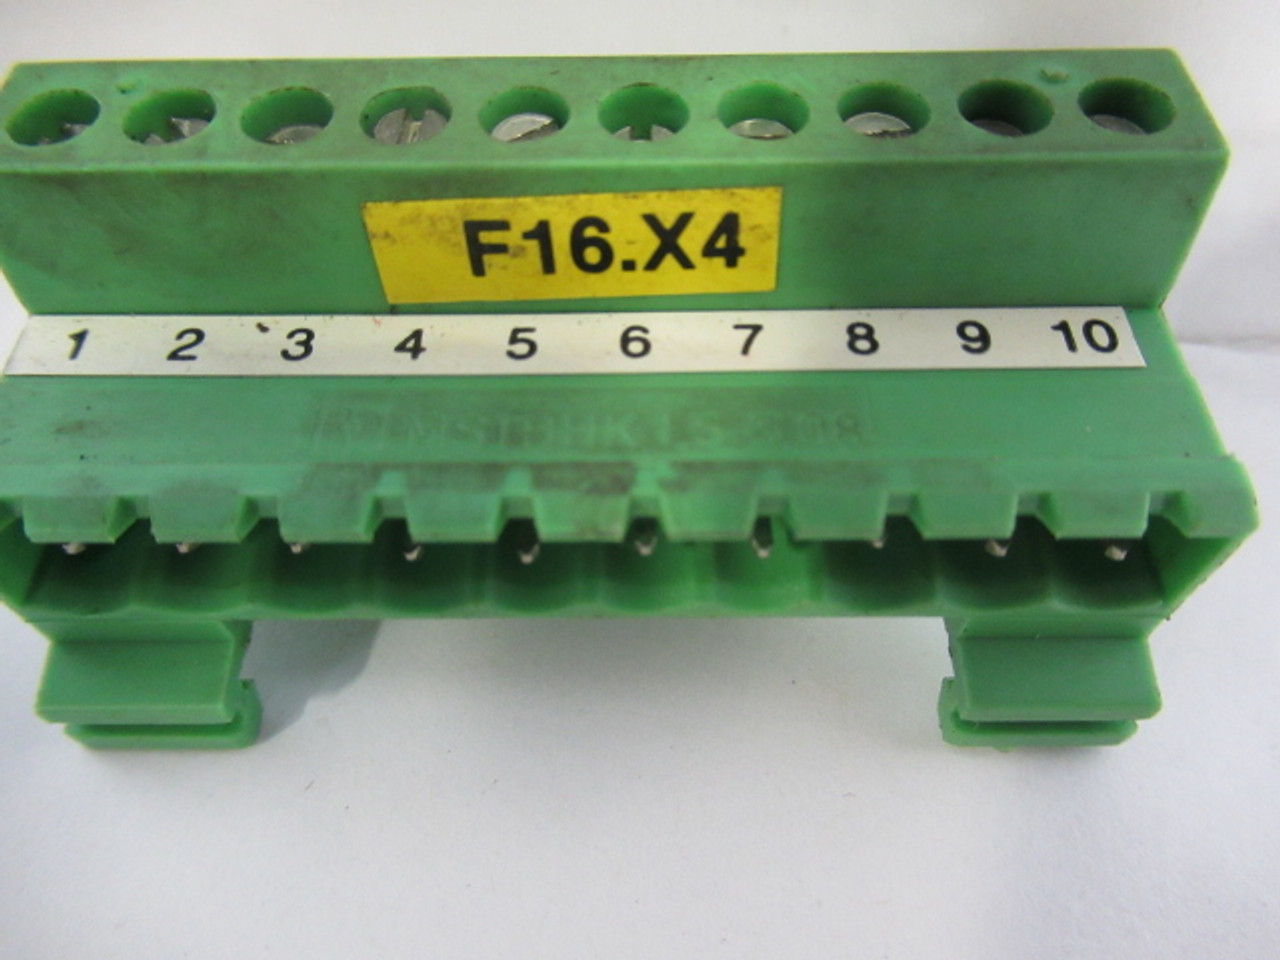 Phoenix Contact MSTBHK-1.5/10-G-5.08 10-Pos Din Rail Connector 10A 300V USED